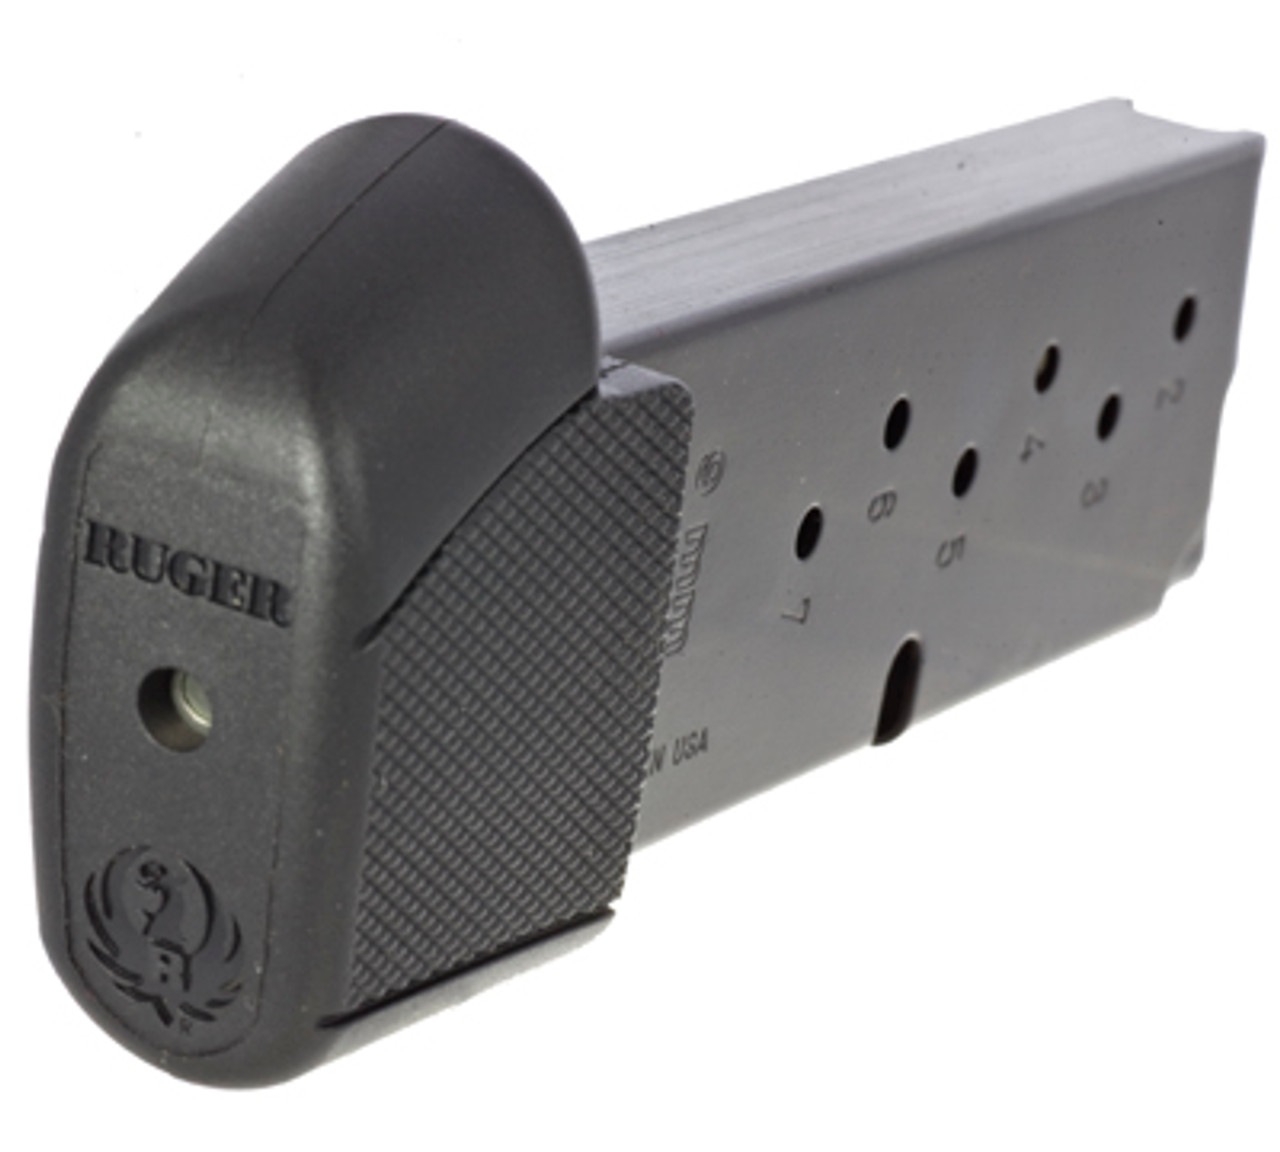 Ruger Magazine Lcp 380 Acp 7 Round Mag Abide Armory 9910